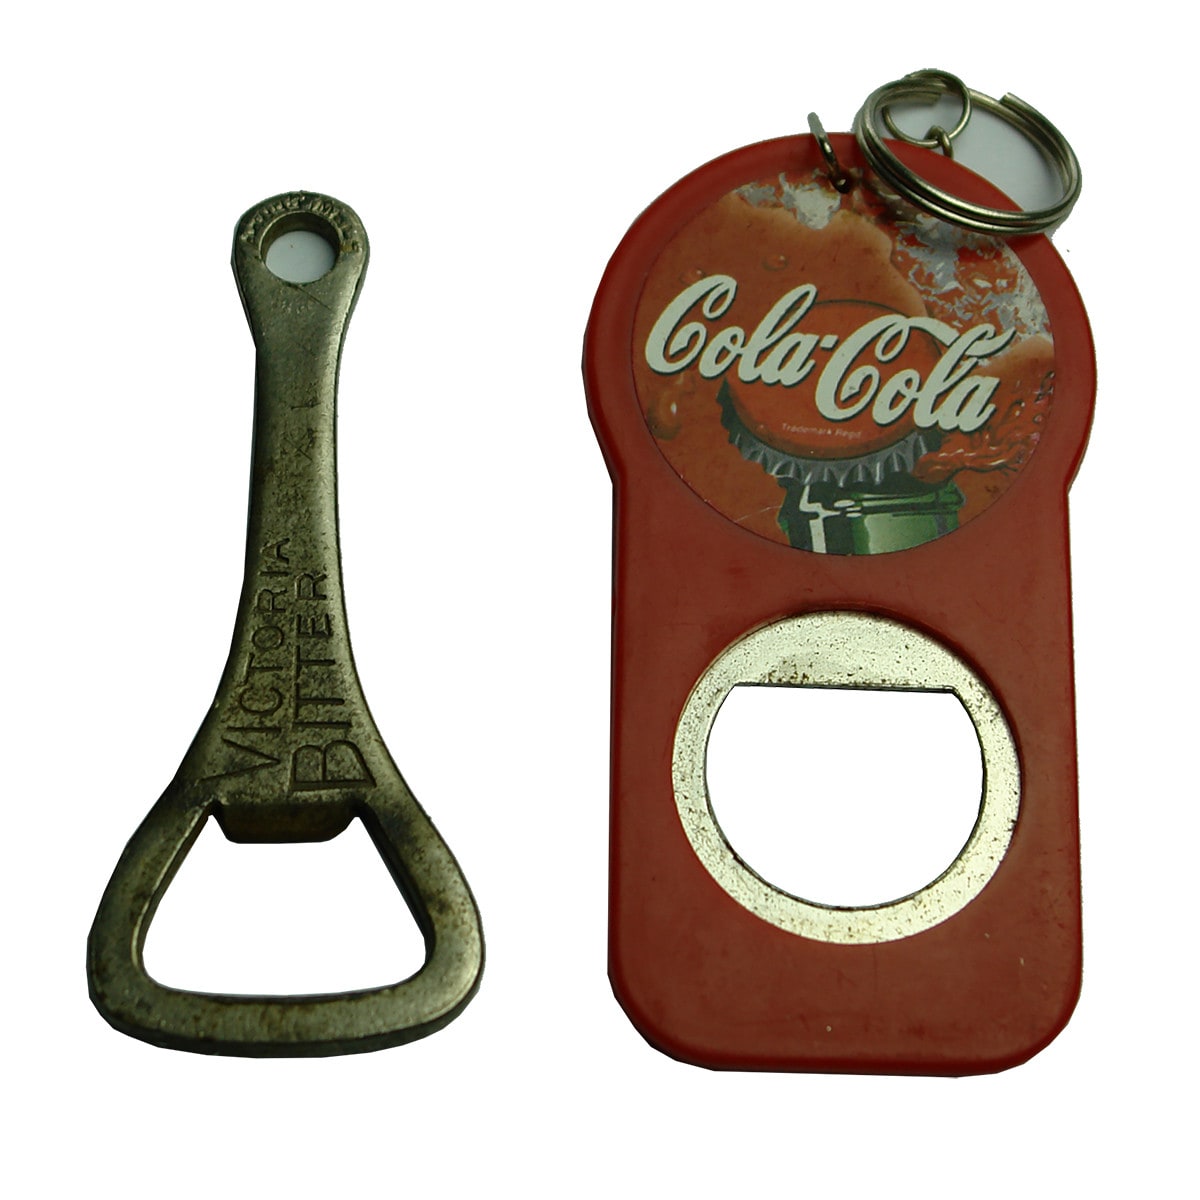 Two crown seal bottle openers: Victoria Bitter and Coca Cola.